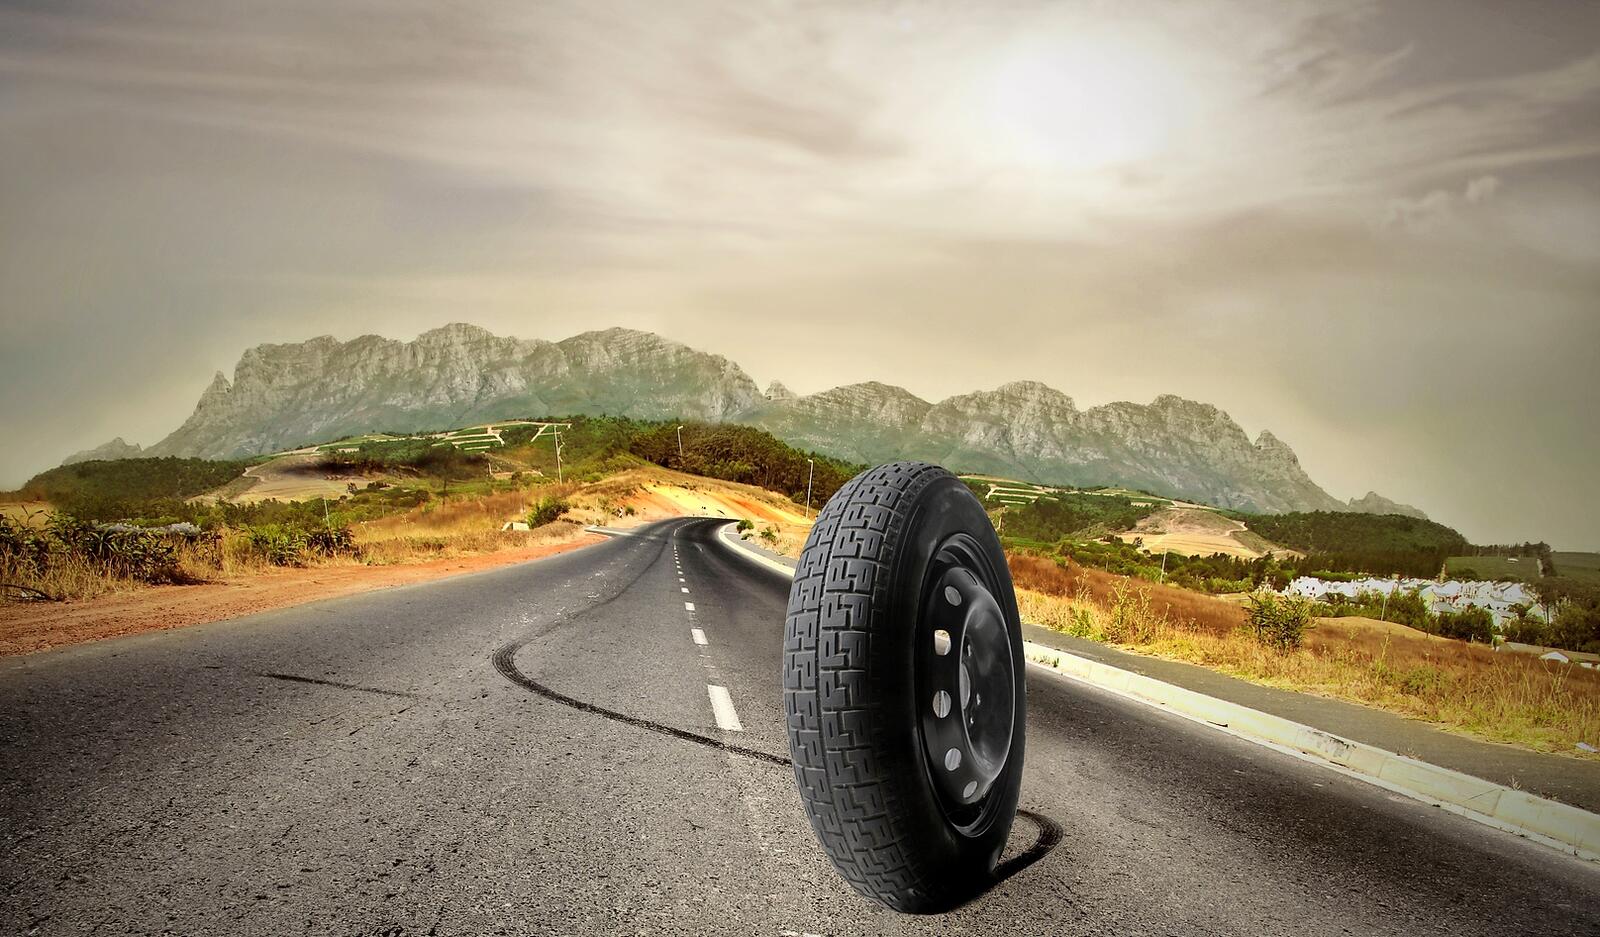 Tyre wear plays a key role when looking at efforts for more sustainability – according to current EU studies 500,000 tons of tyre wear are produced in Europe per year.